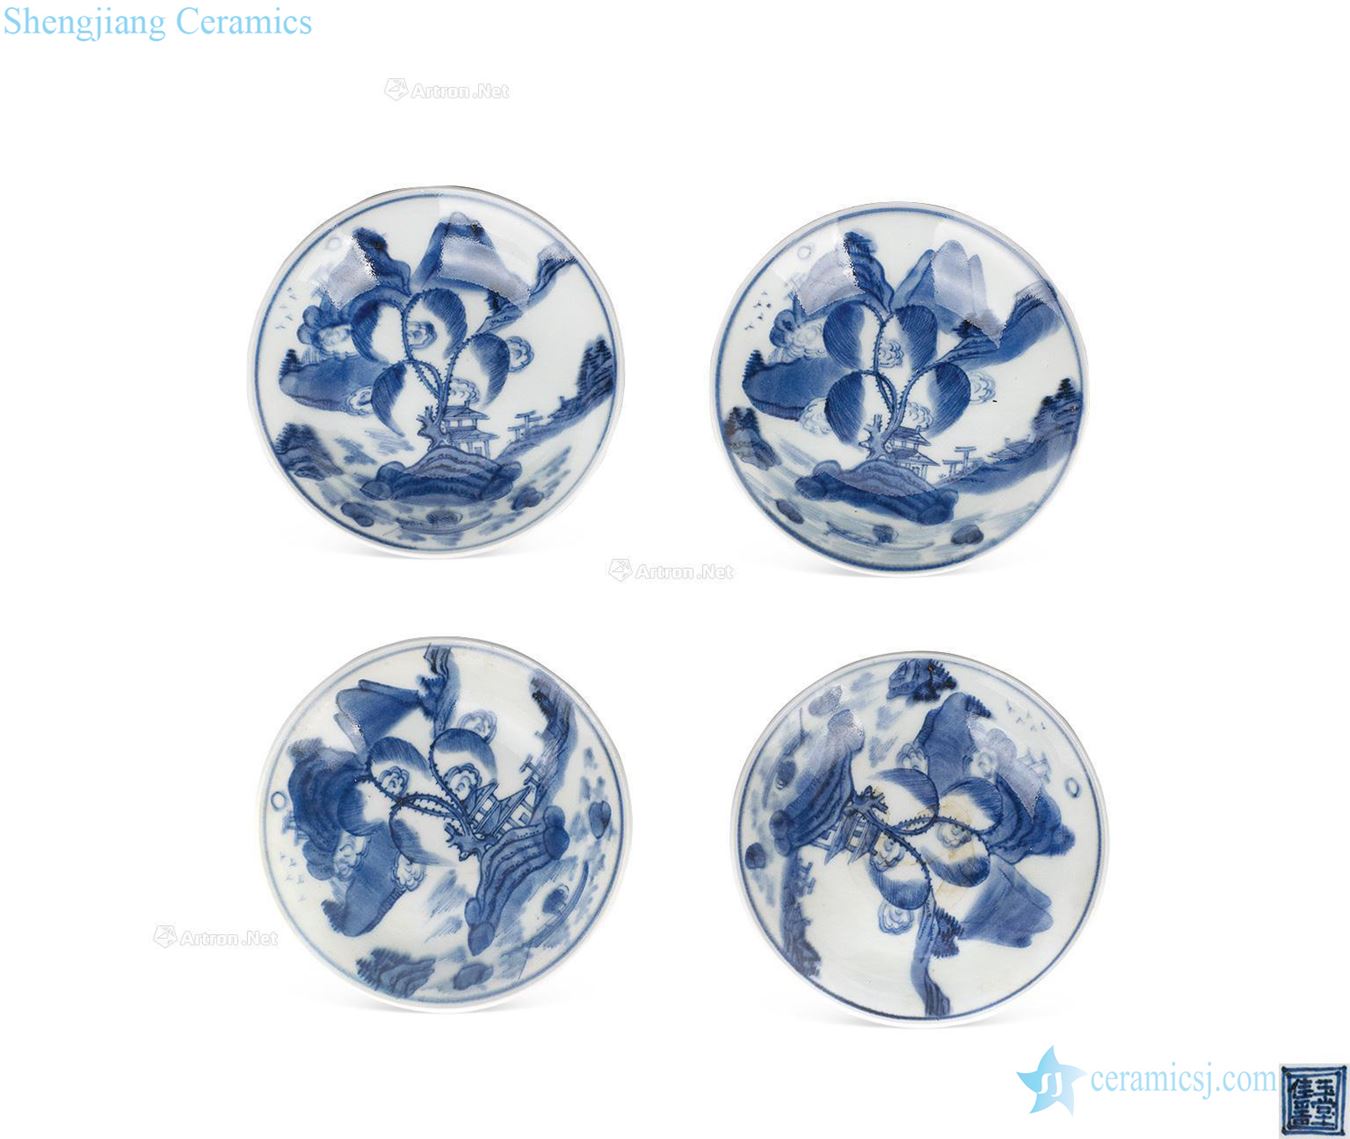 Late Ming dynasty Blue and white landscape pattern caps (four pieces)